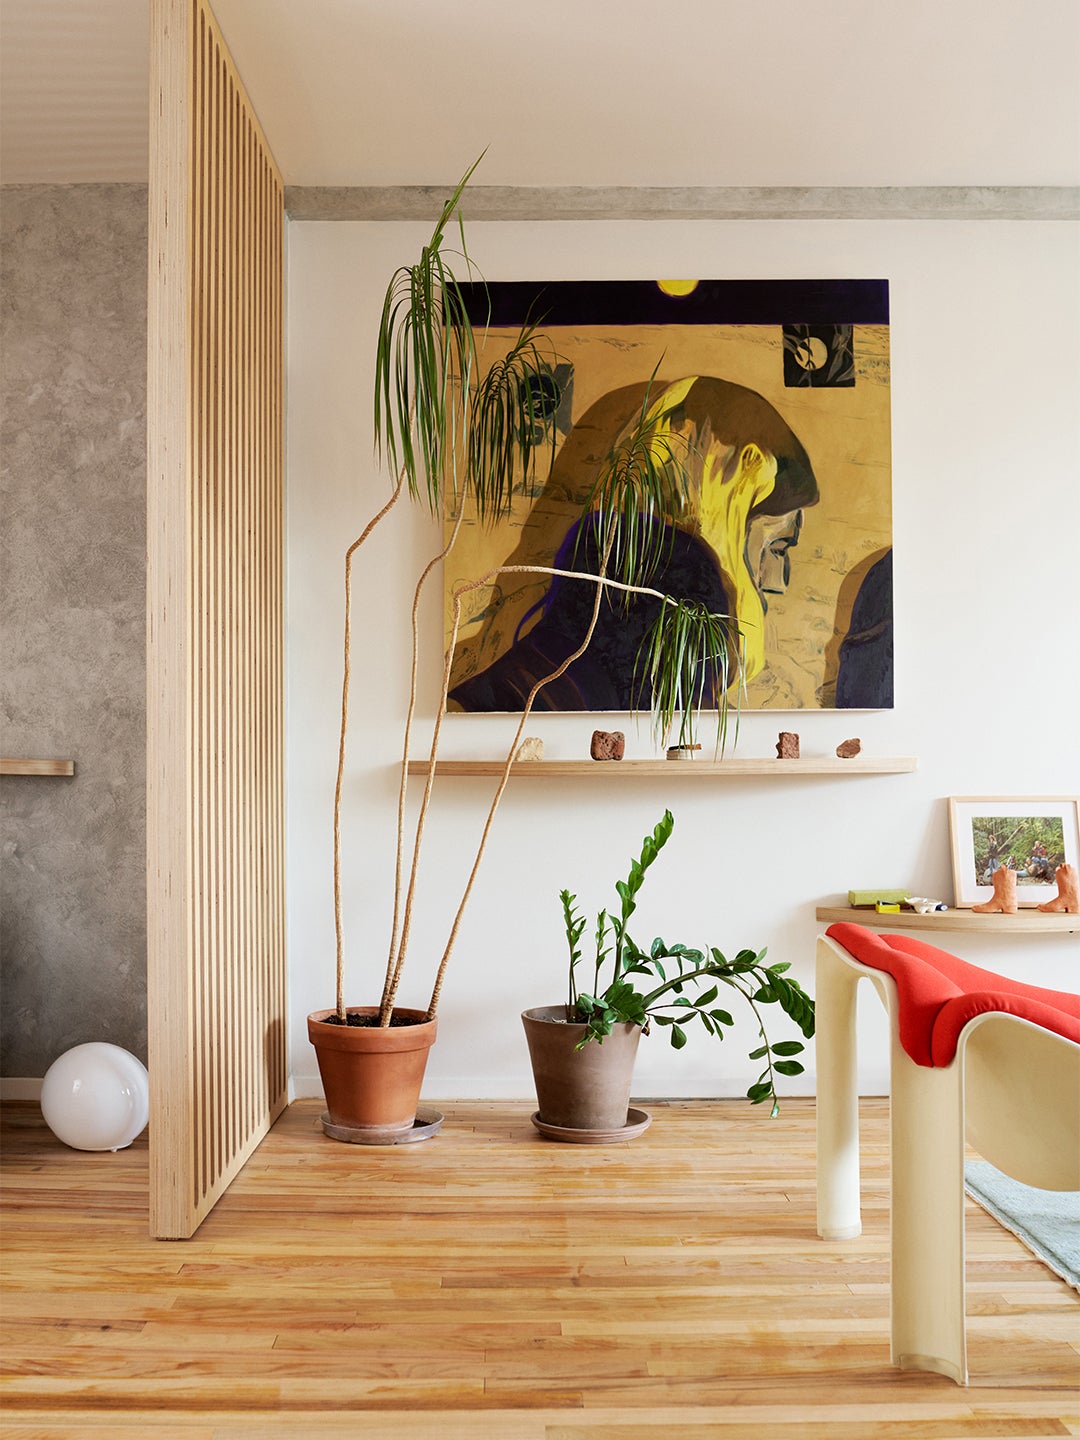 Painting in Living Room with Wood Floors and Plywood Wall Divider by Tangible Space